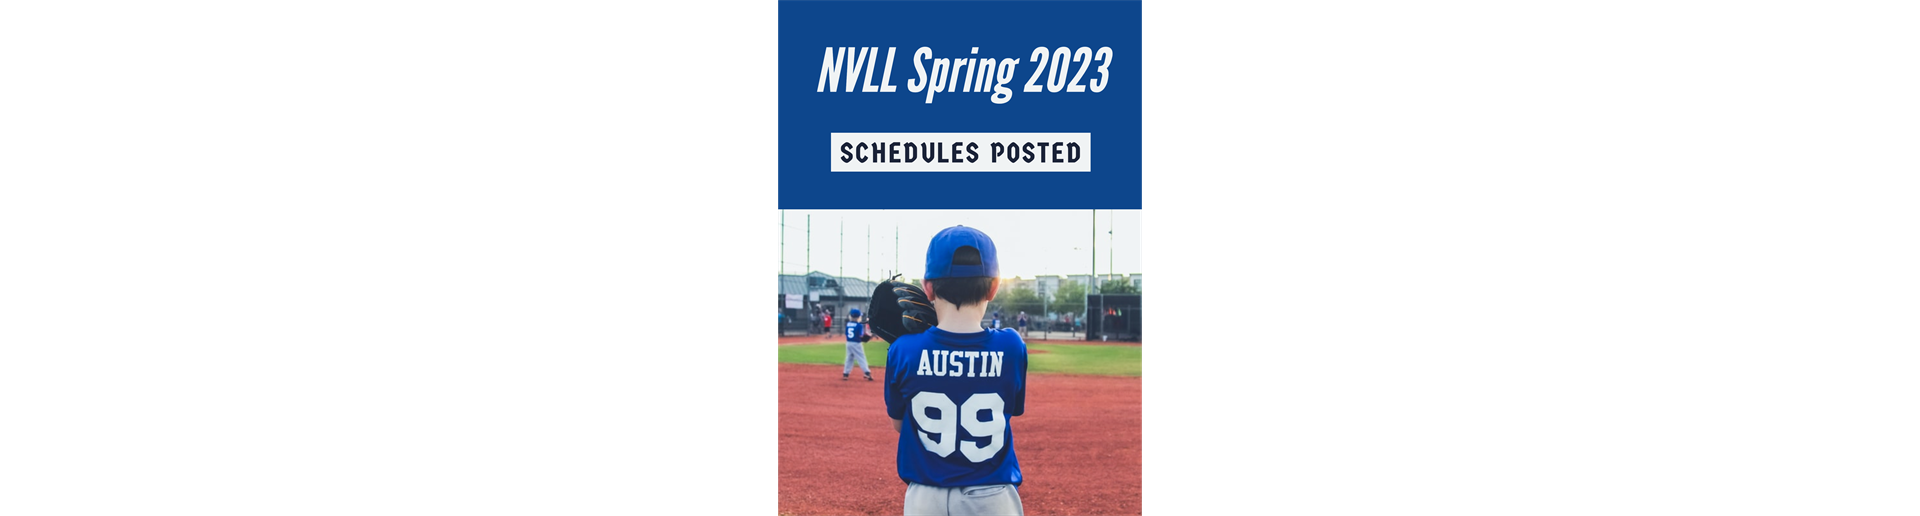 ALL SPRING 2023 GAME SCHEDULES ARE POSTED